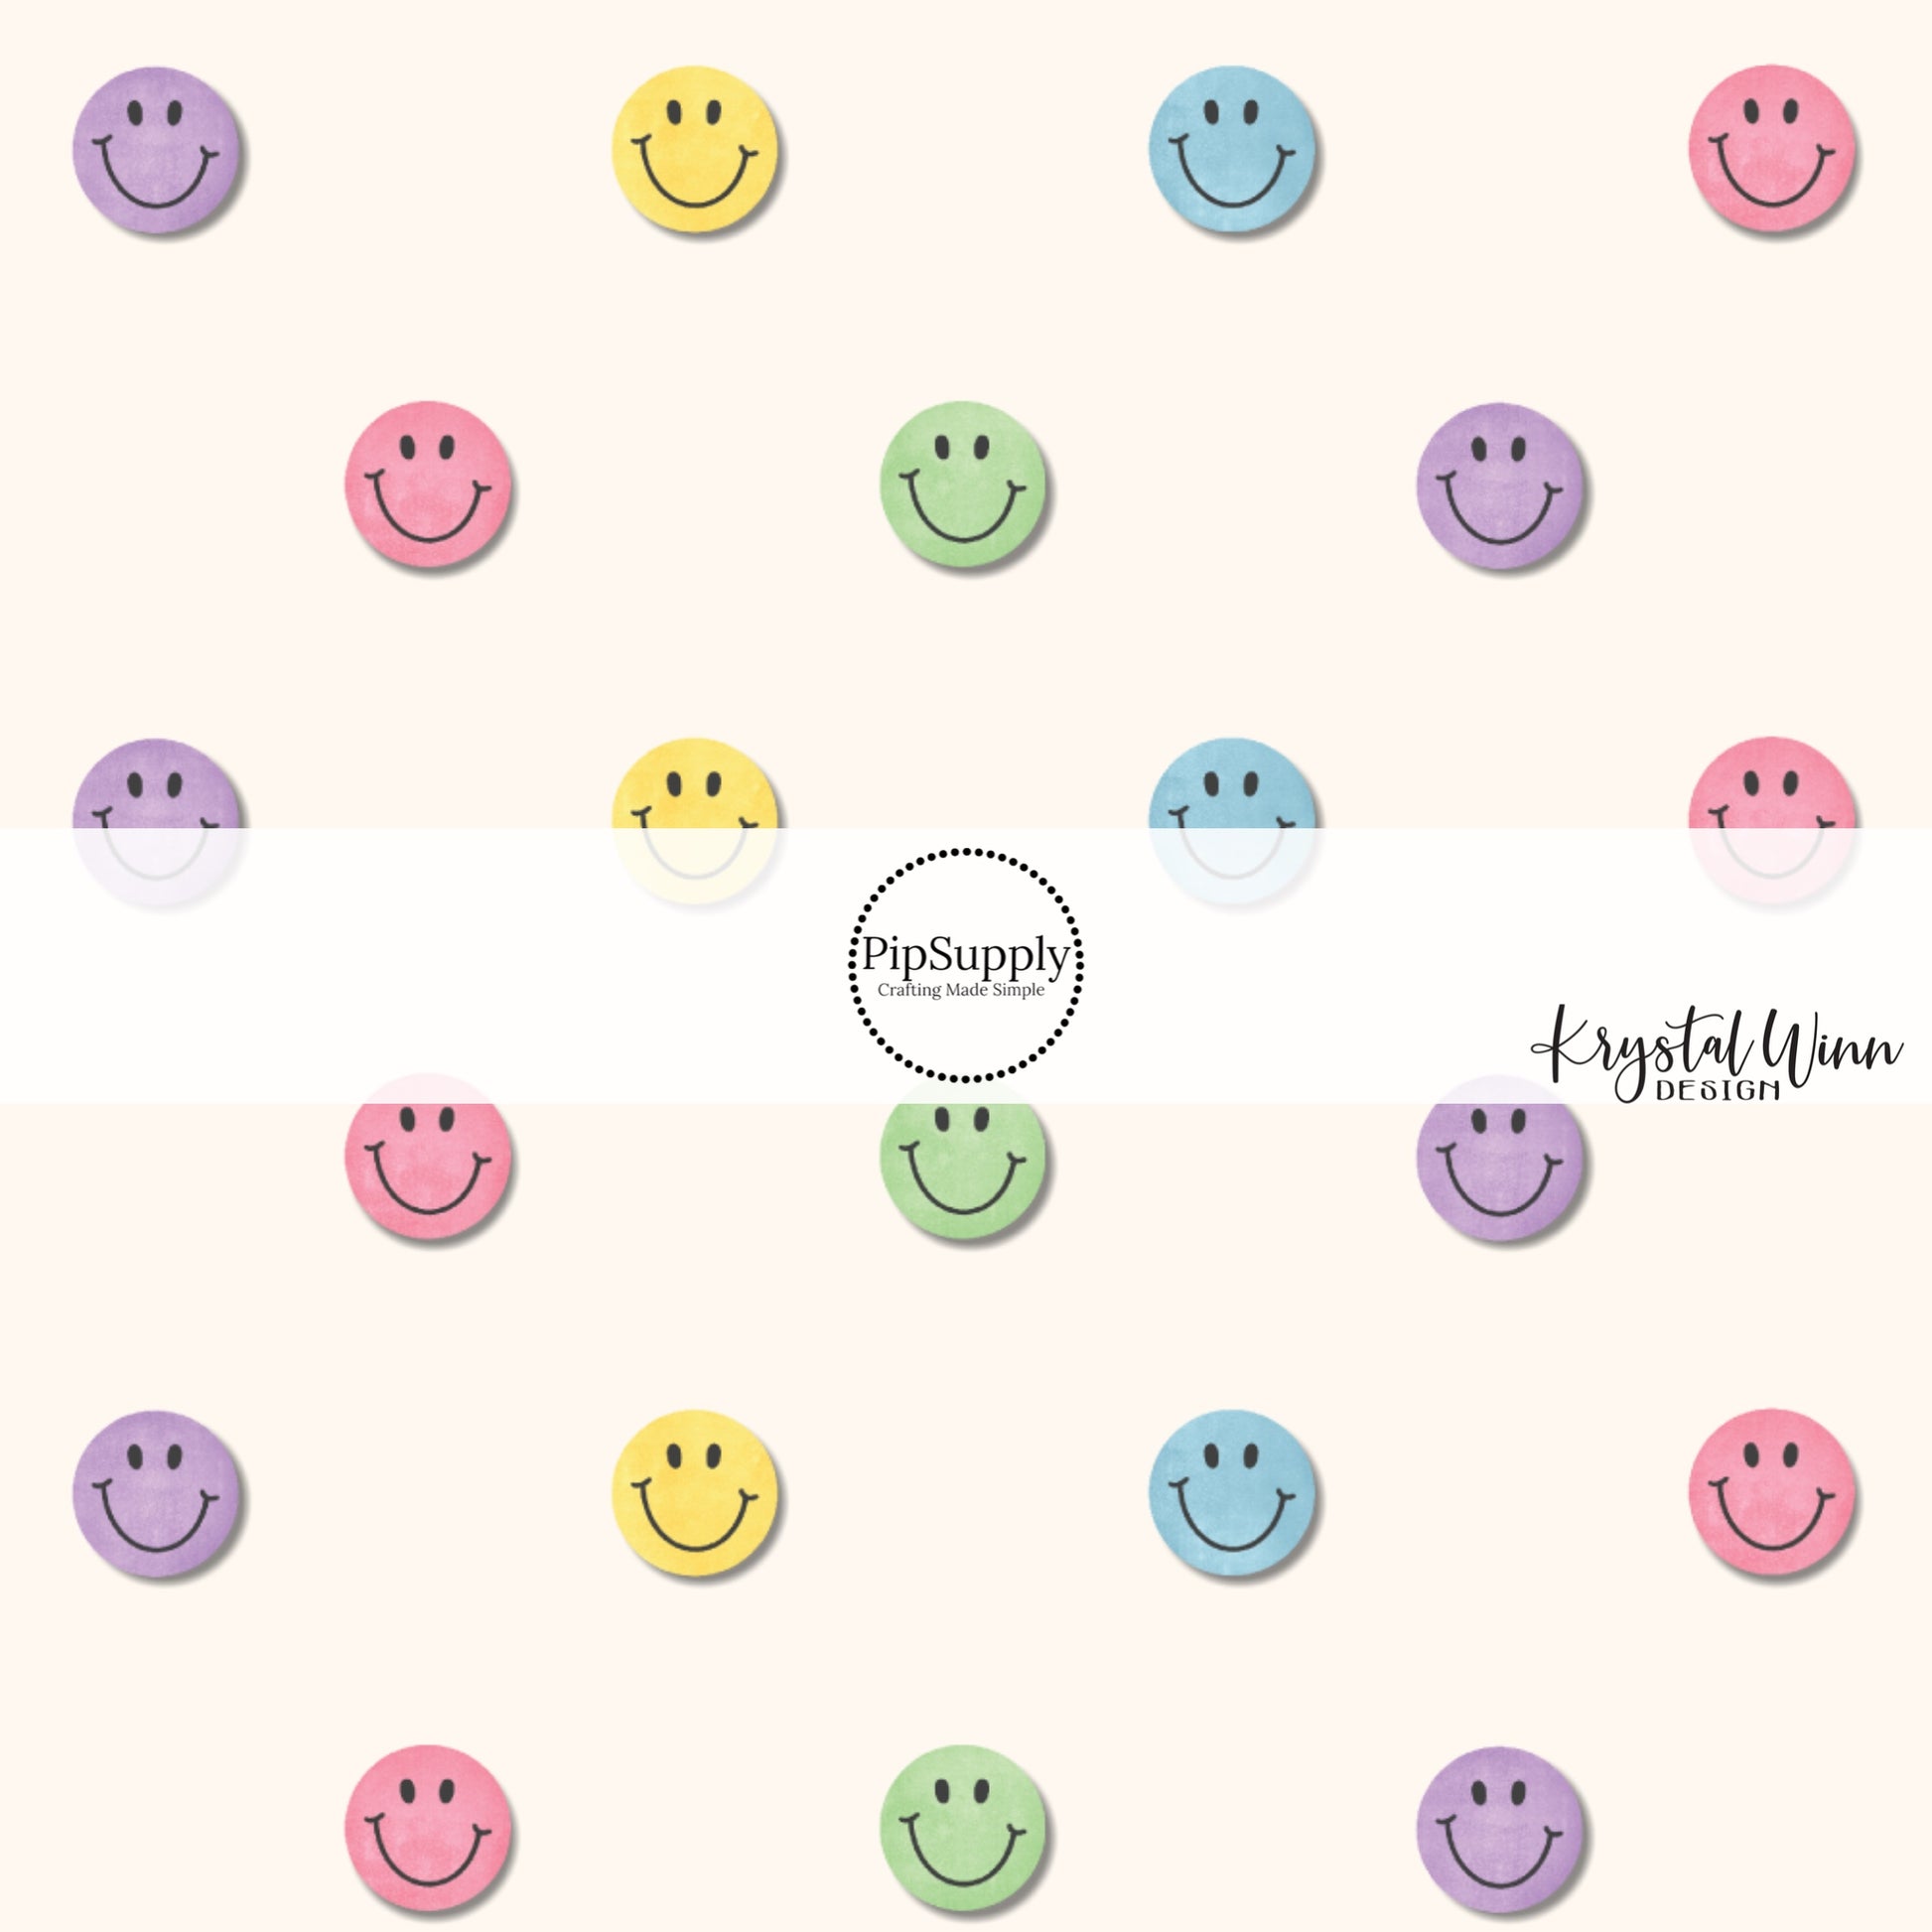 These fall happy face themed cream fabric by the yard features pastel blue, purple, green, yellow, and light pink smiley faces on light cream. This fun fall themed fabric can be used for all your sewing and crafting needs! 